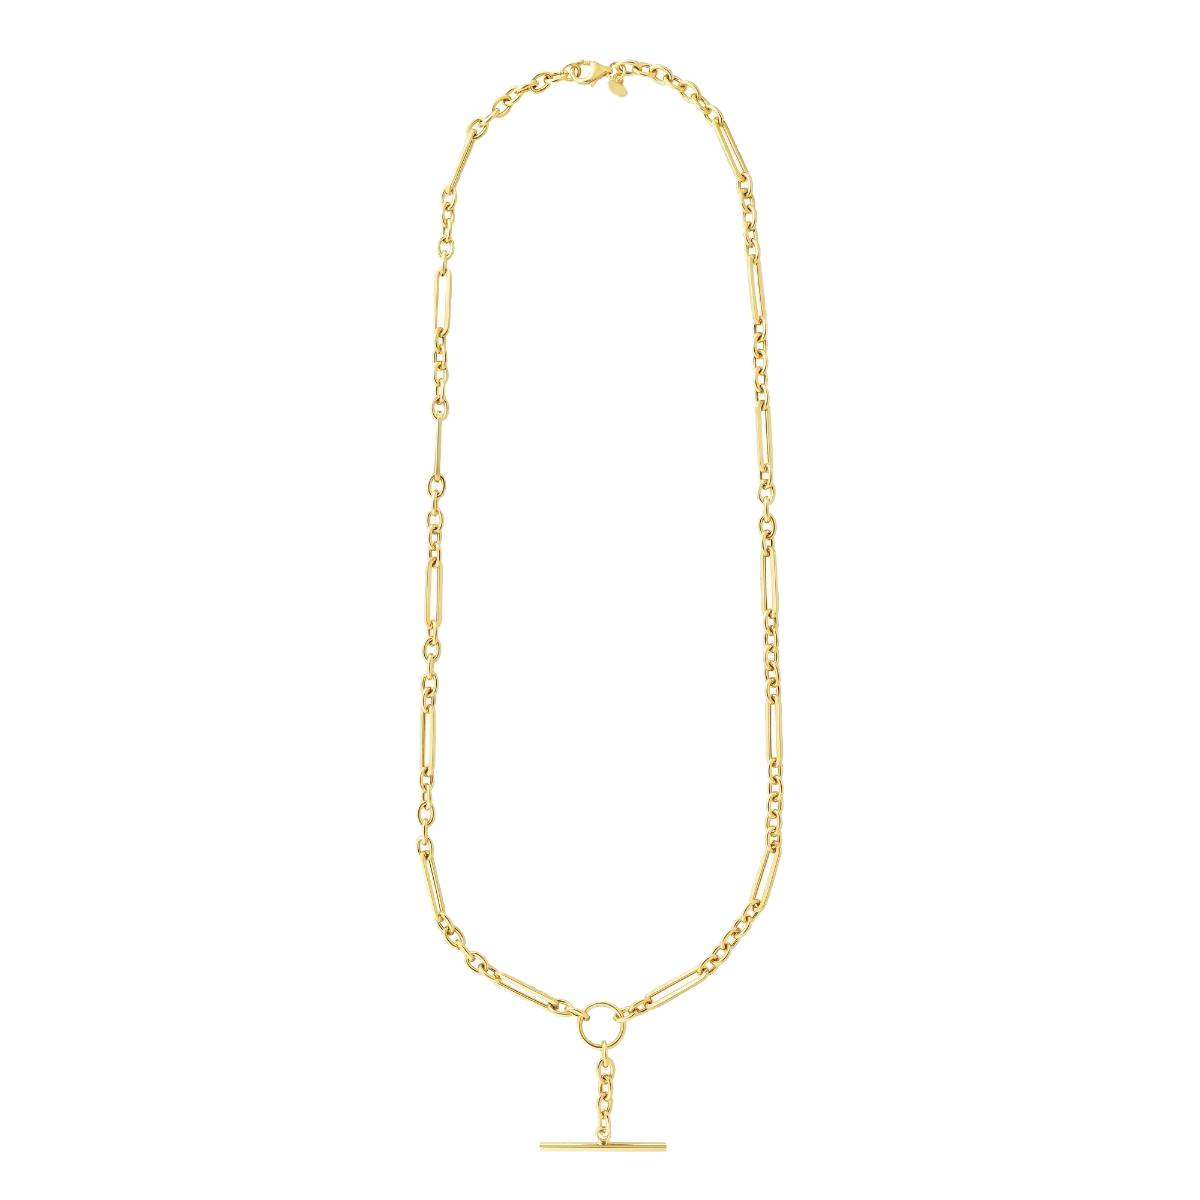 Short Chain Link Necklace Featuring Toggle Closure and Cross (147188)